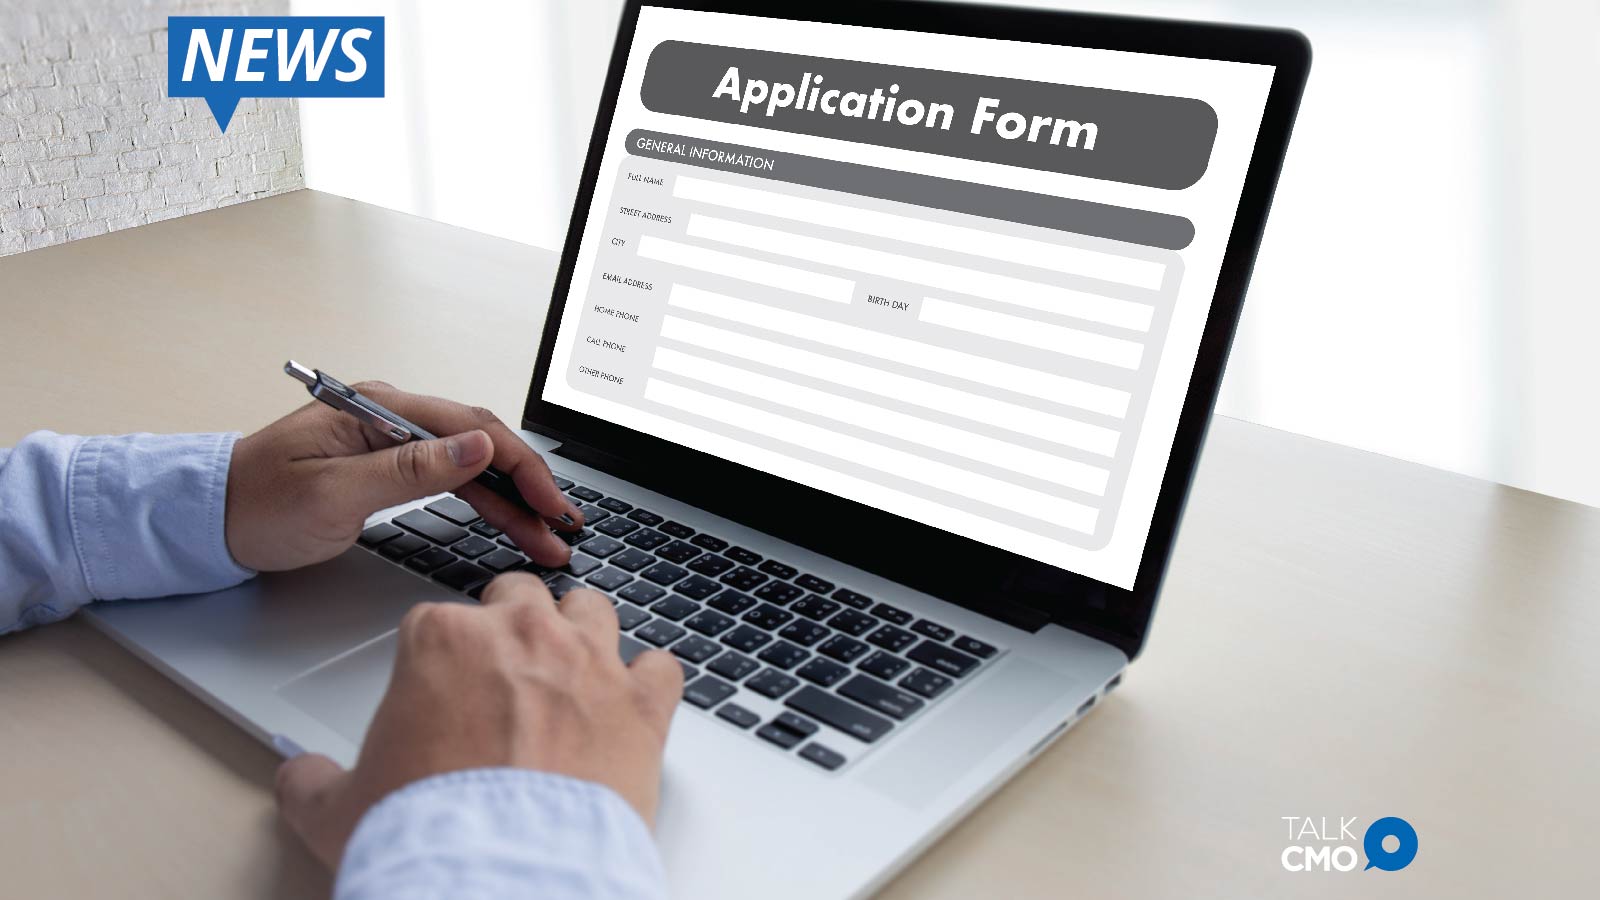 Application is being updated. Form. Form filling. Application на фото.